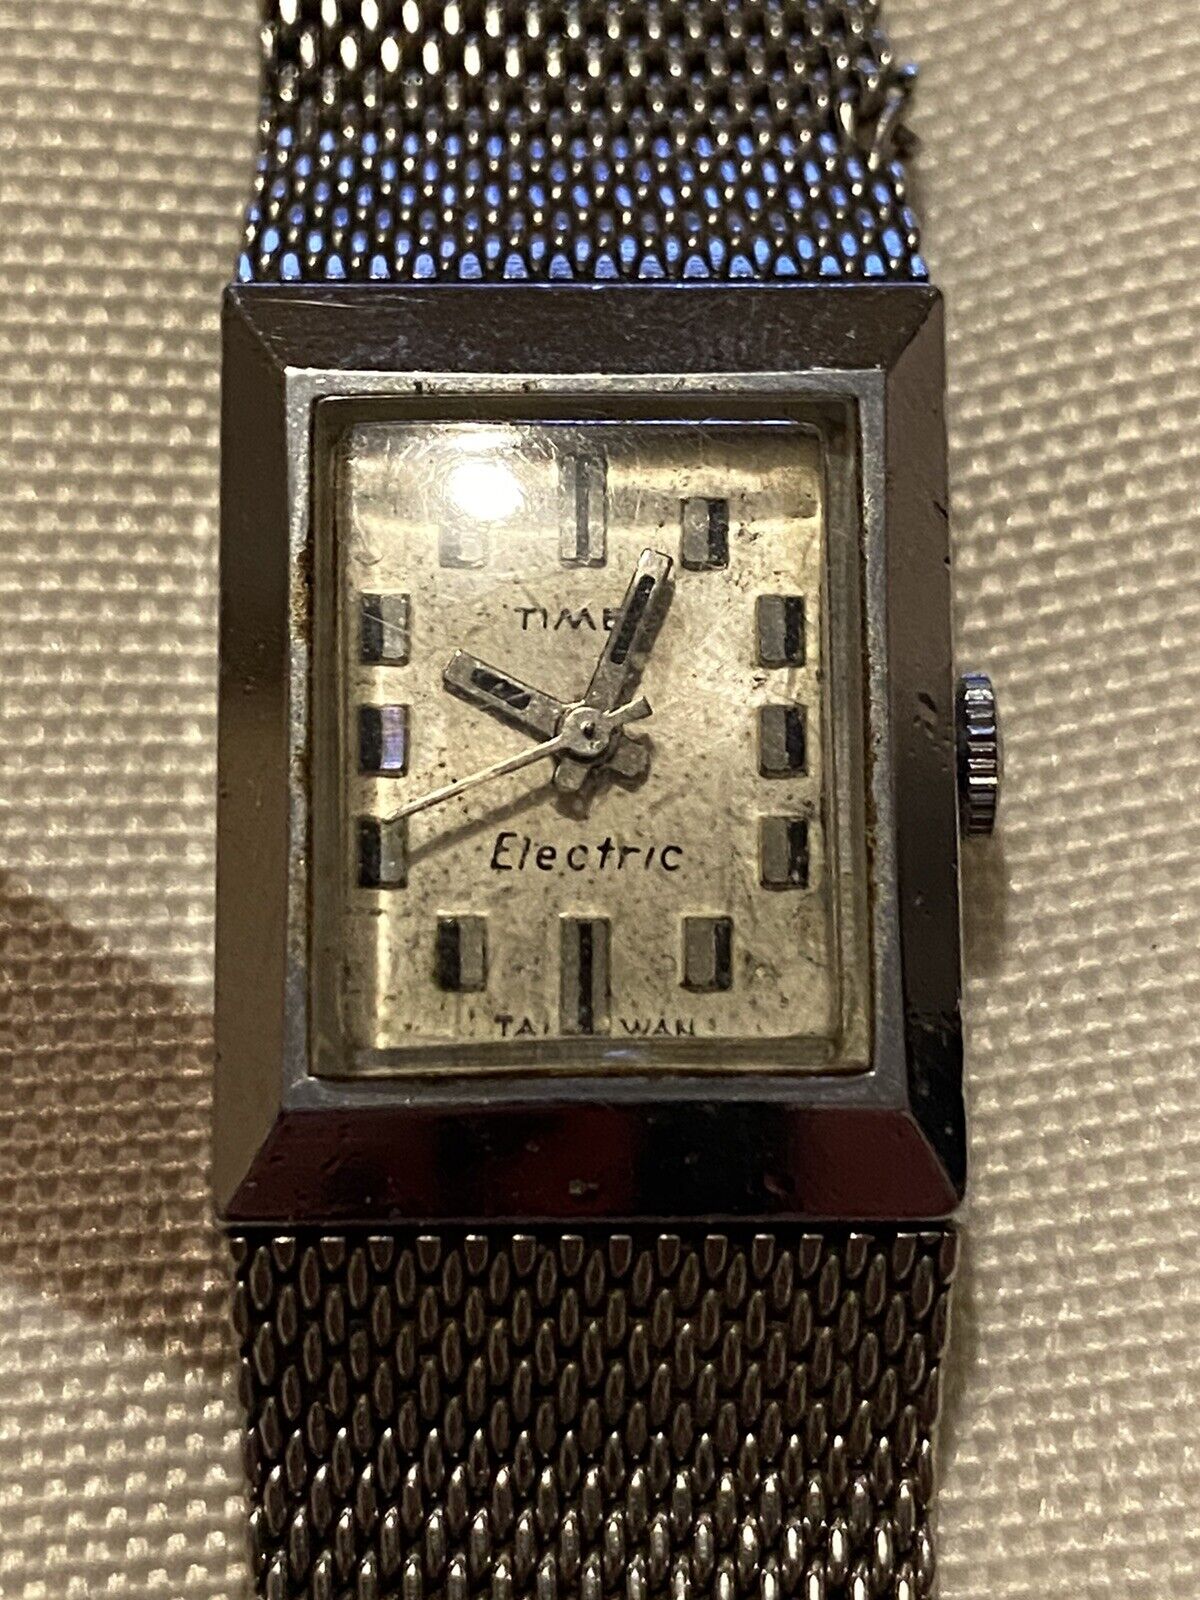 Vintage Watch Timex Electric Stainless Steel